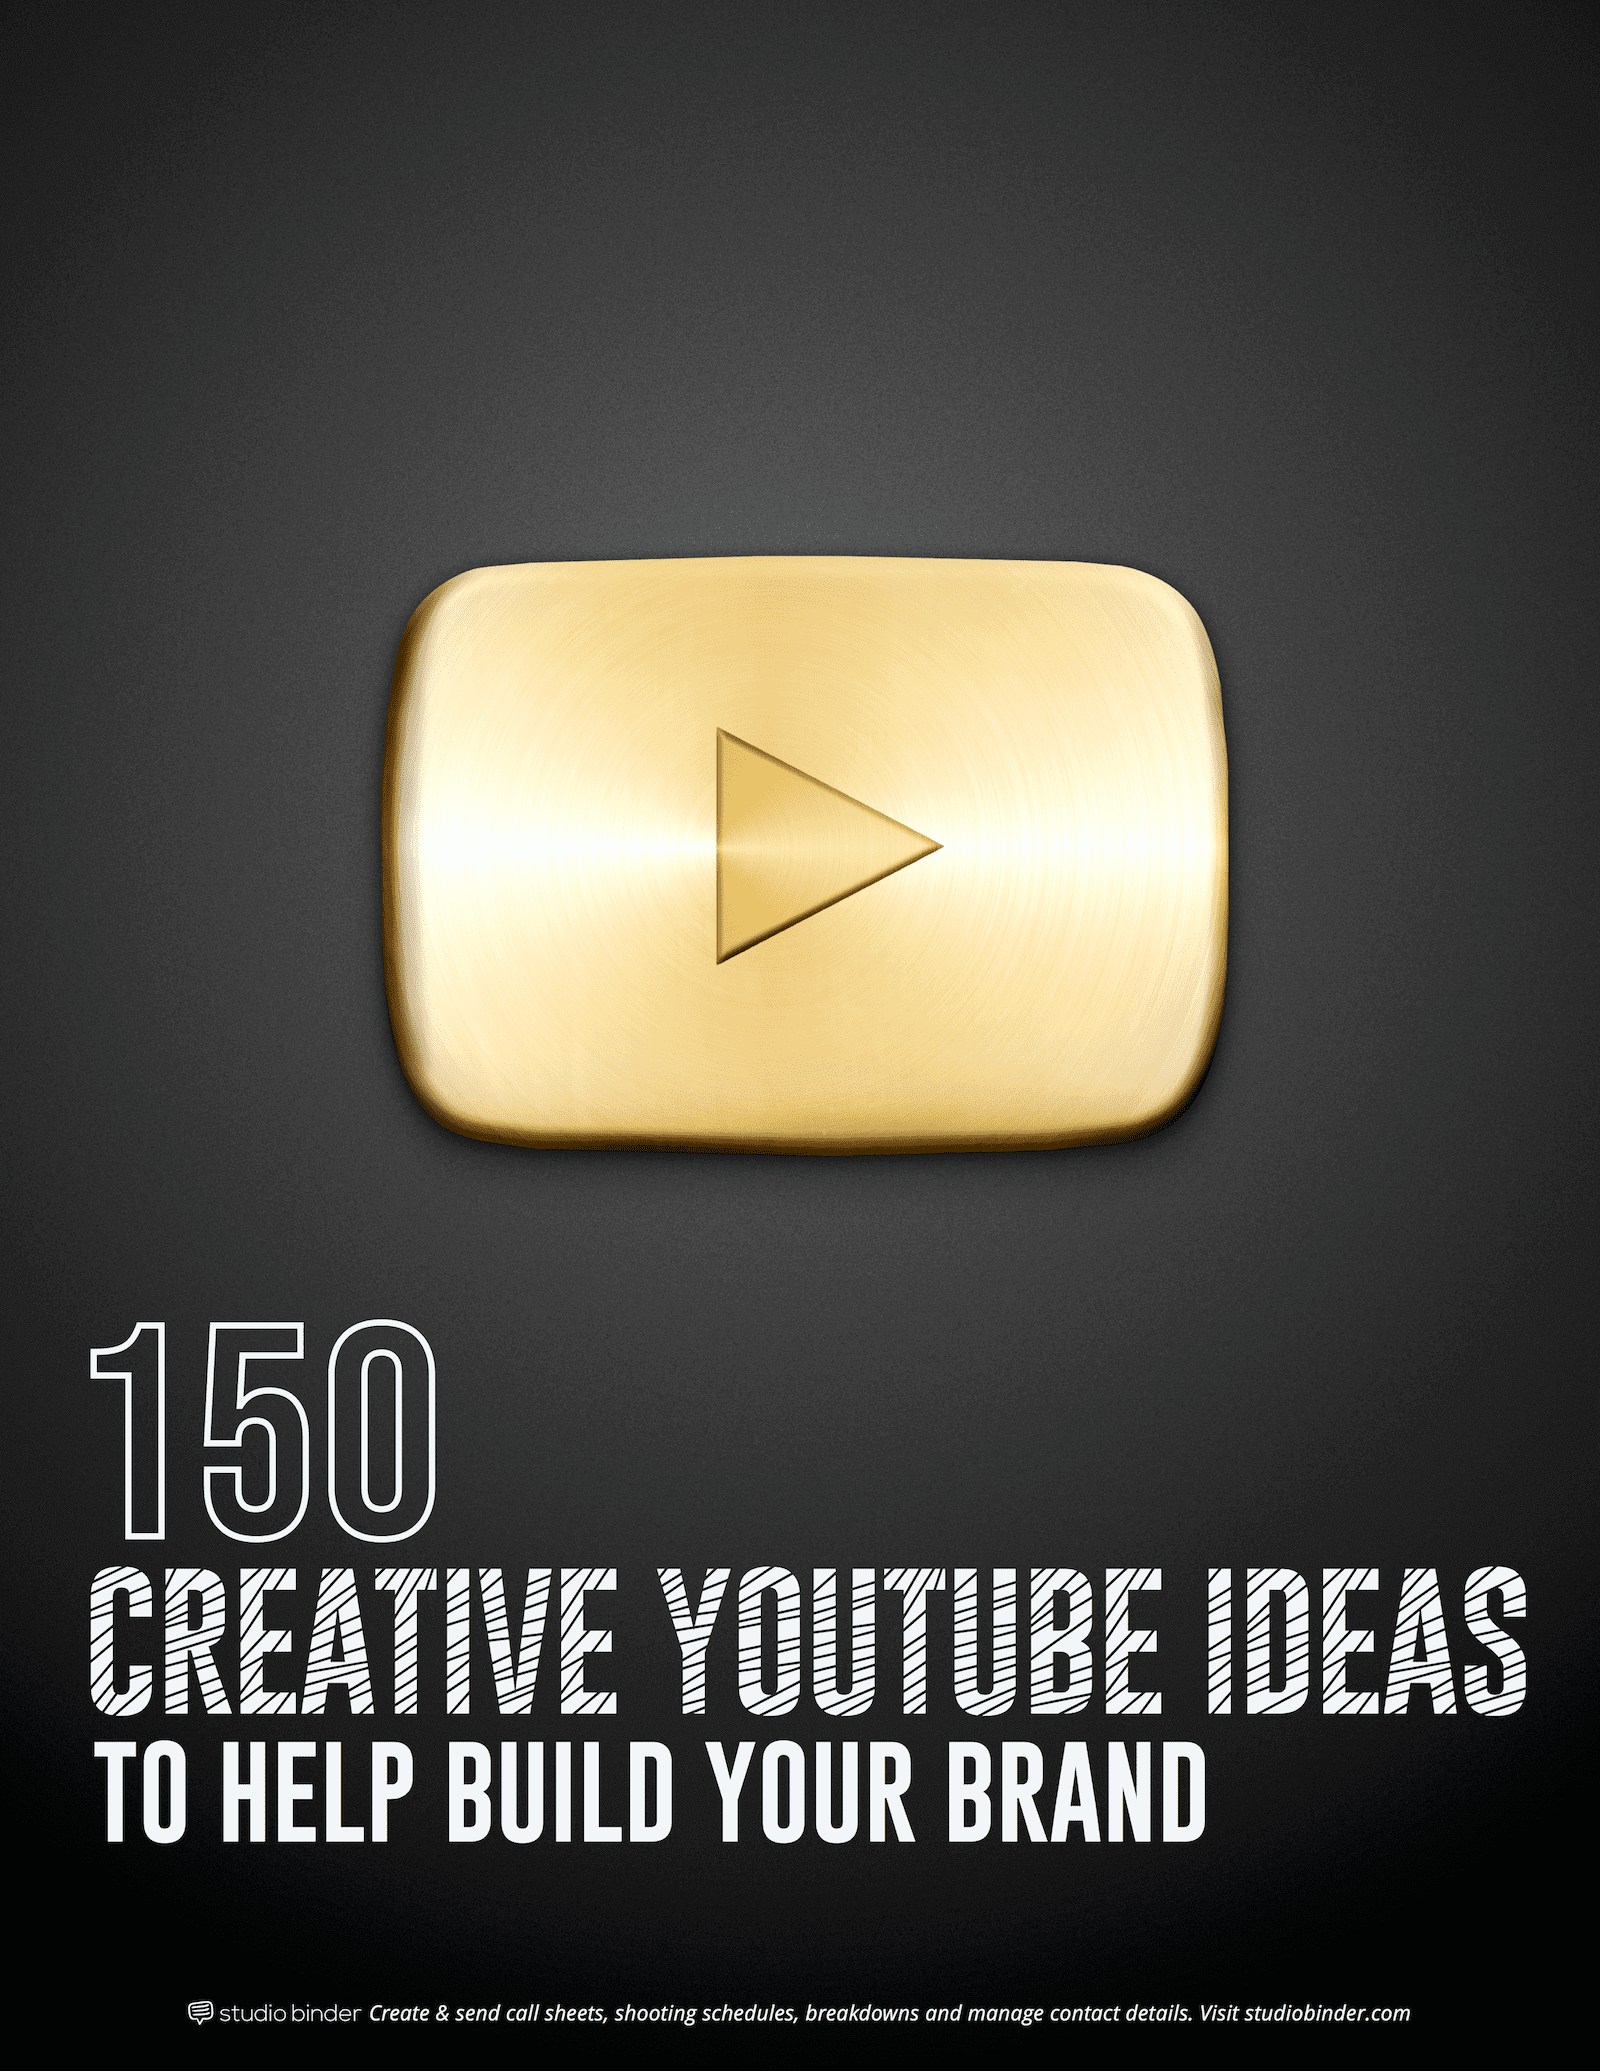 150 creative youtube ideas to build your brand cover page studiobinder - youtube fortnite song 1 hour